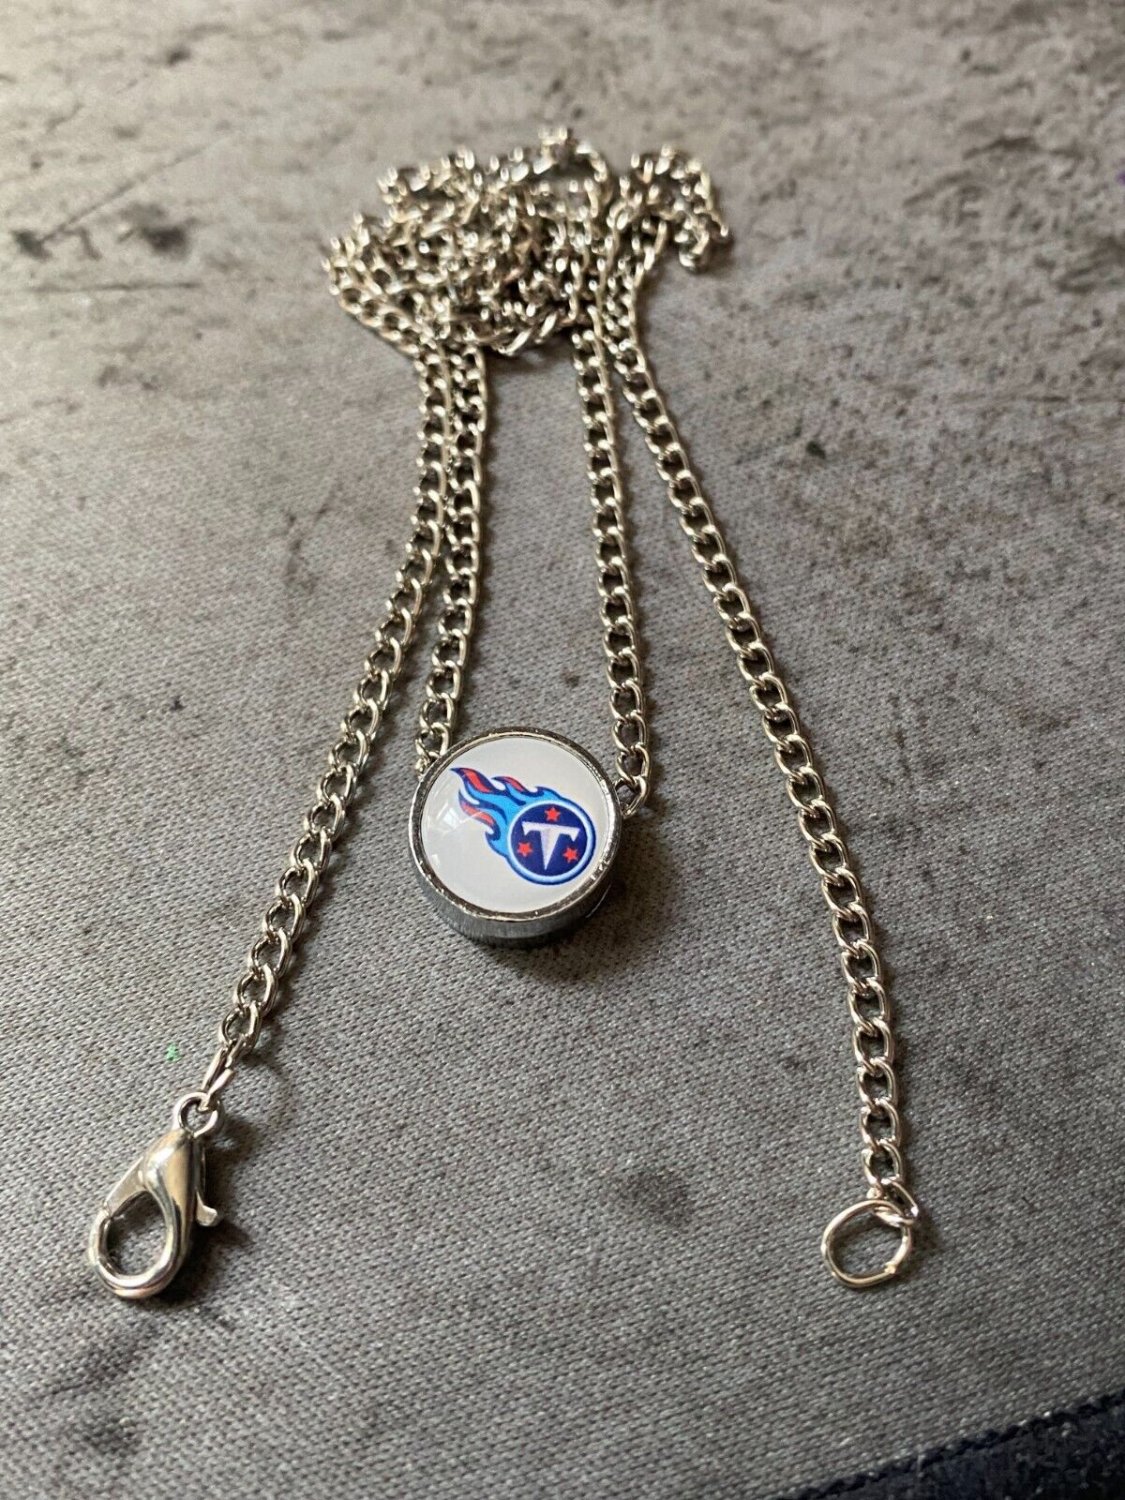 Tennessee Titans slide charm necklace